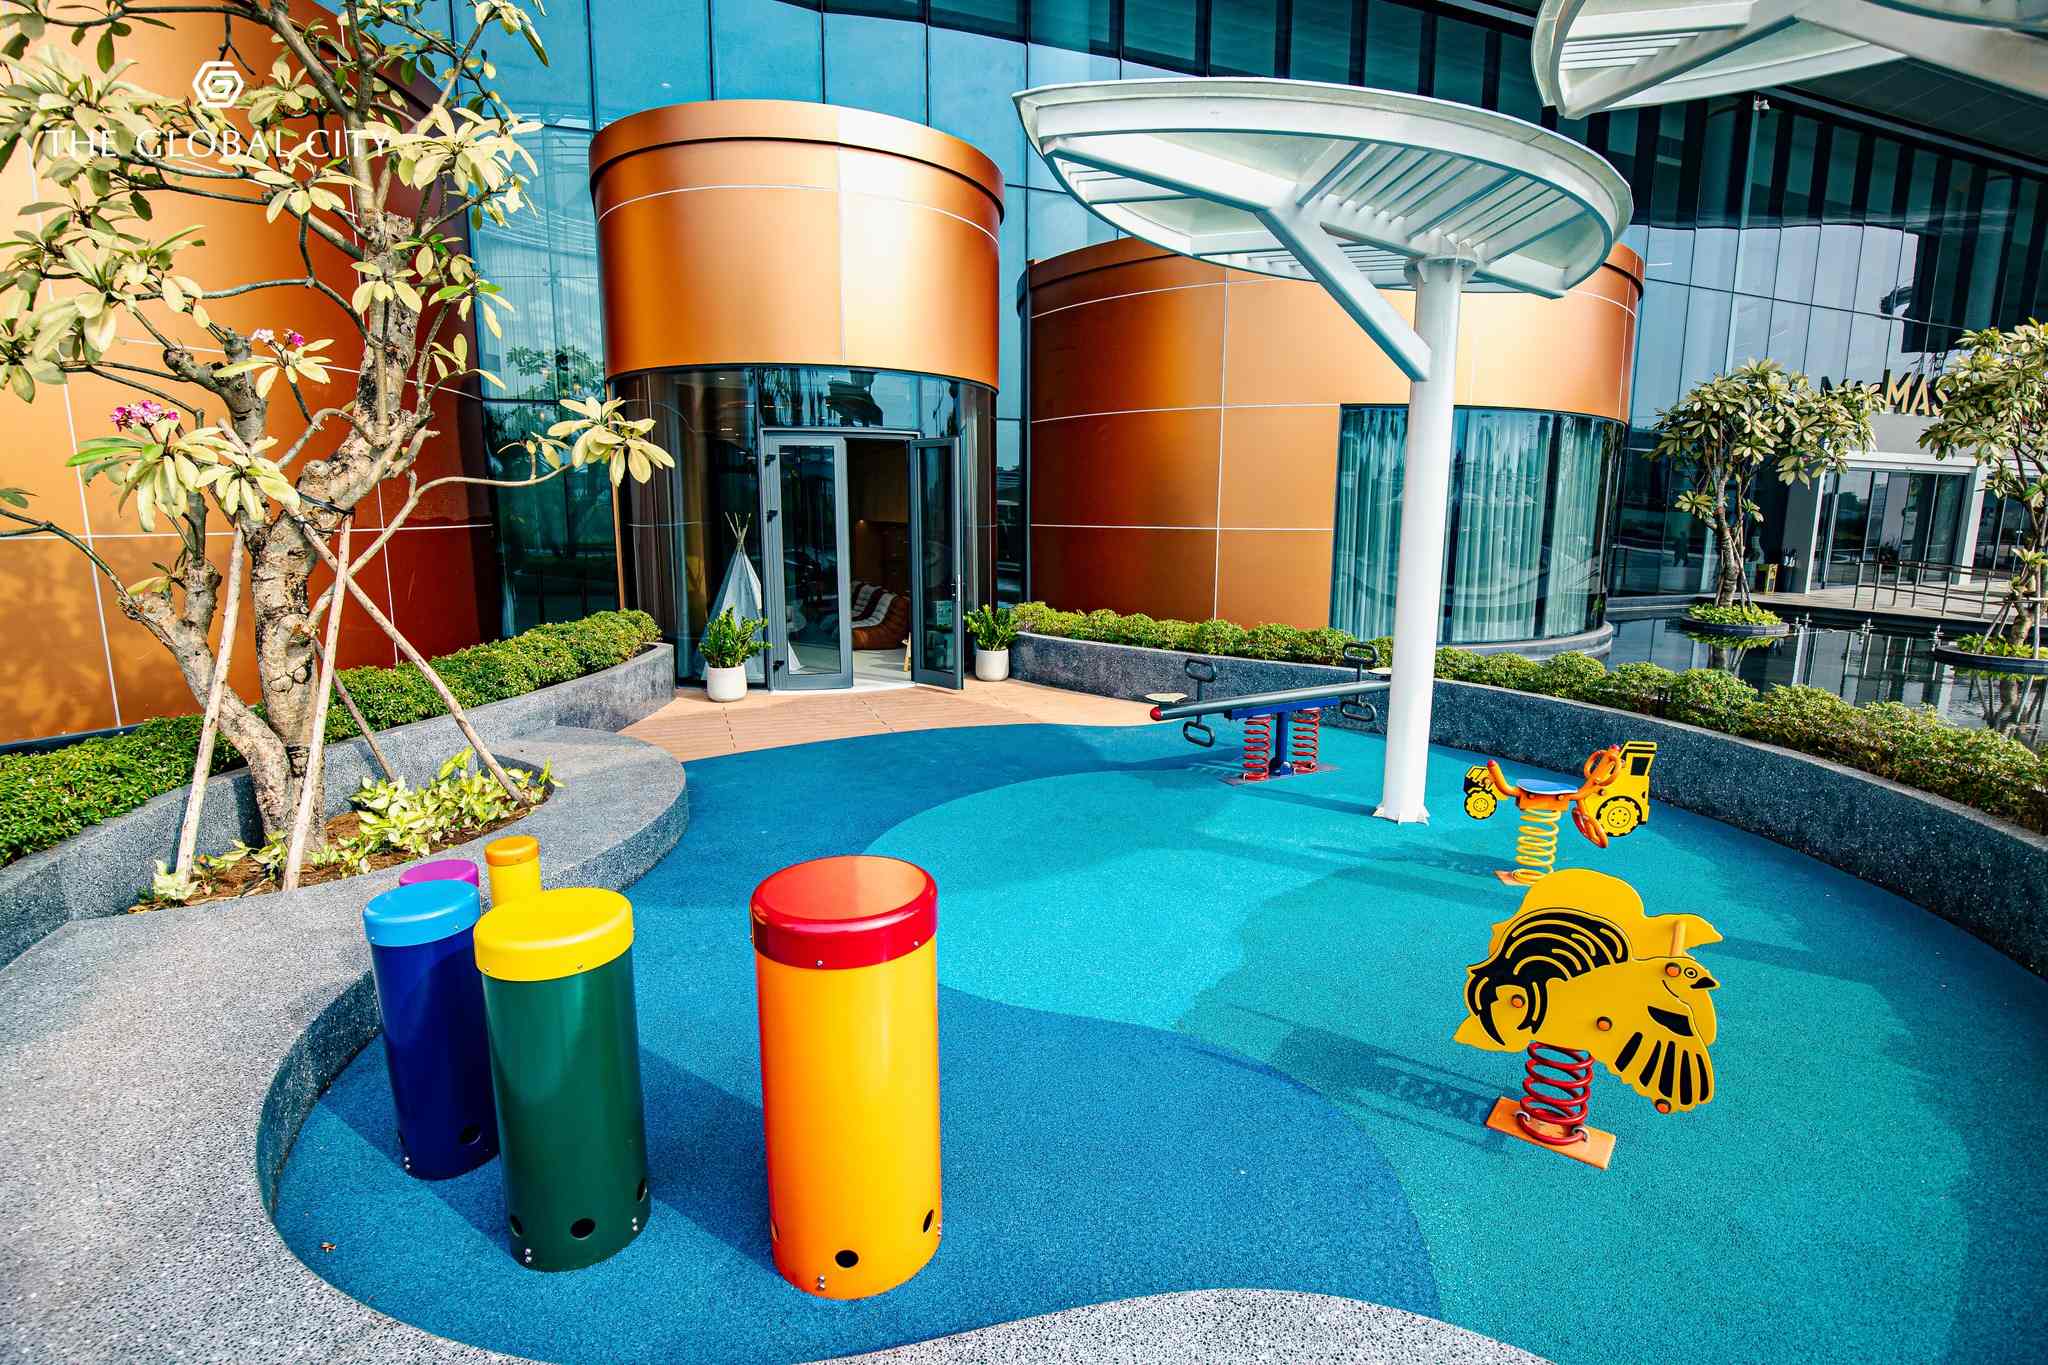 Kids Play Area - Newly opened children's play space at The Global City Sales Gallery cum Lifestyle Hub